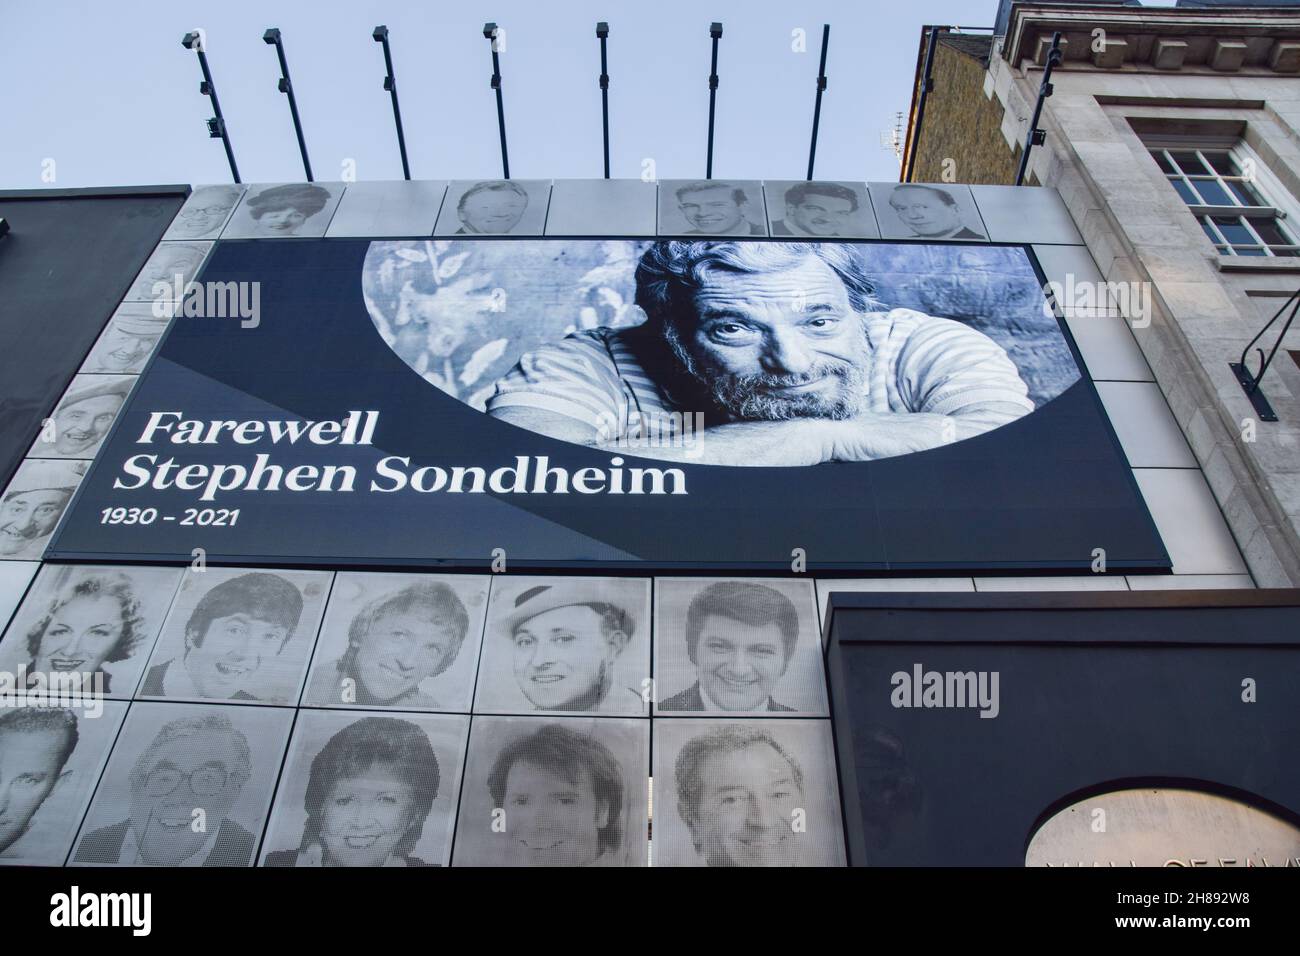 London, UK. 28th November 2021. A tribute to Stephen Sondheim at the London Palladium. The musical theatre composer and lyricist died on 26th November, aged 91. Credit: Vuk Valcic / Alamy Live News Stock Photo